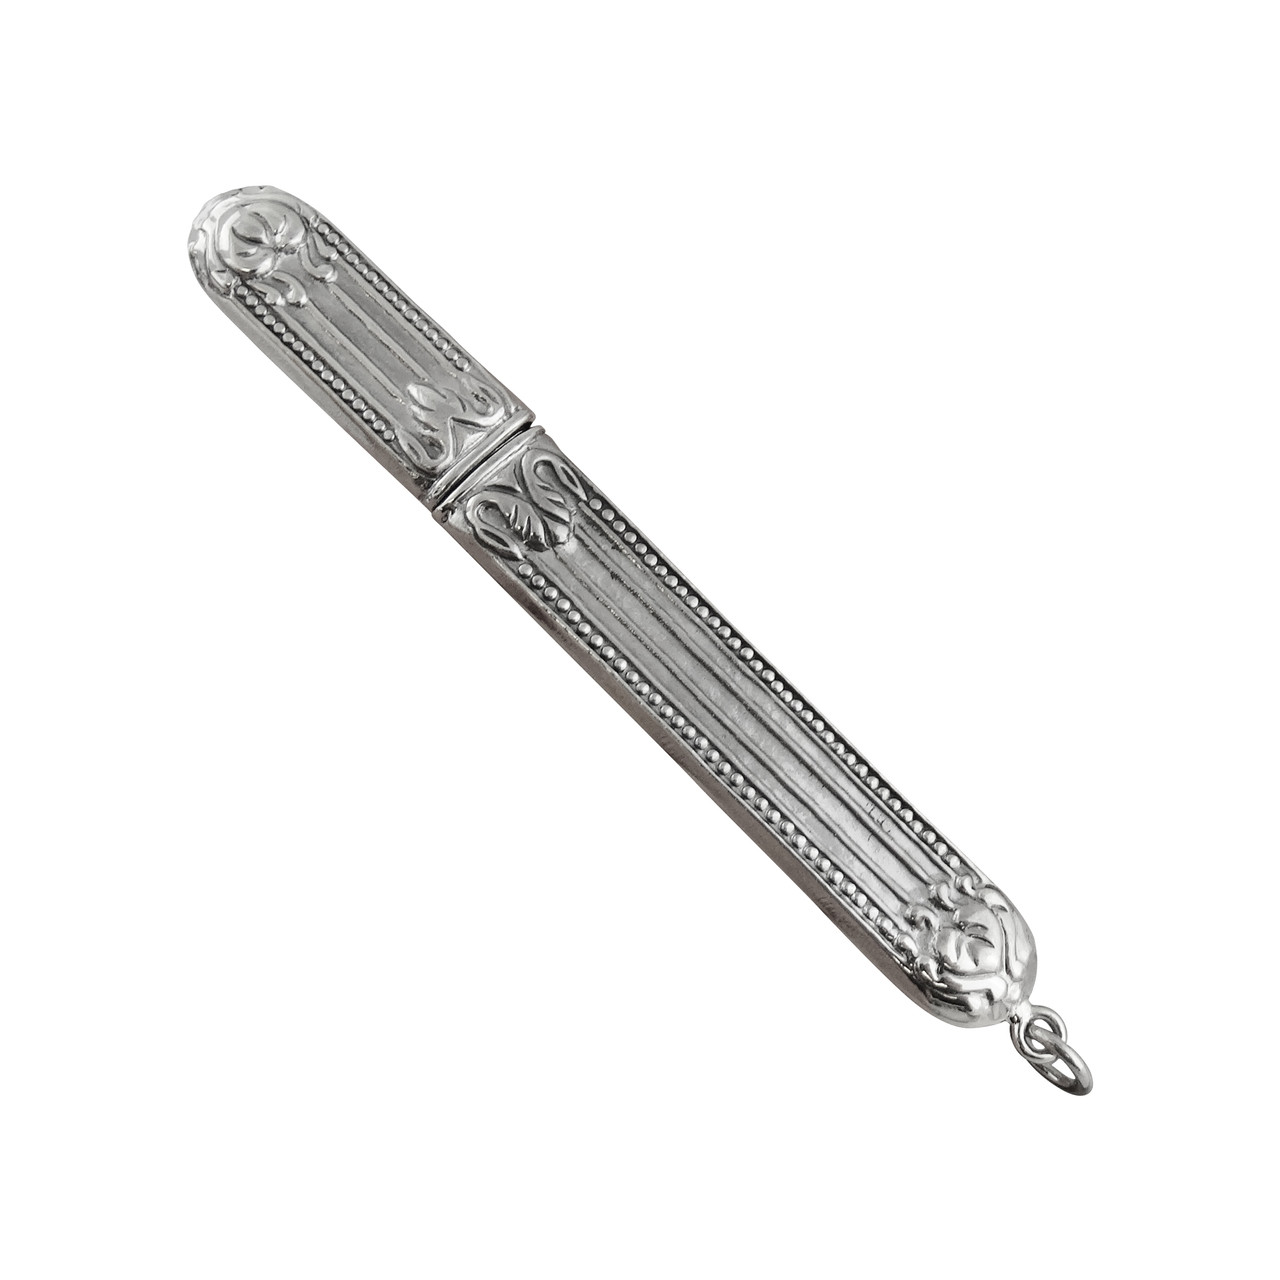 Needle Threader - 925 Sterling Silver - Antique Replica Embossed Sewing Tool